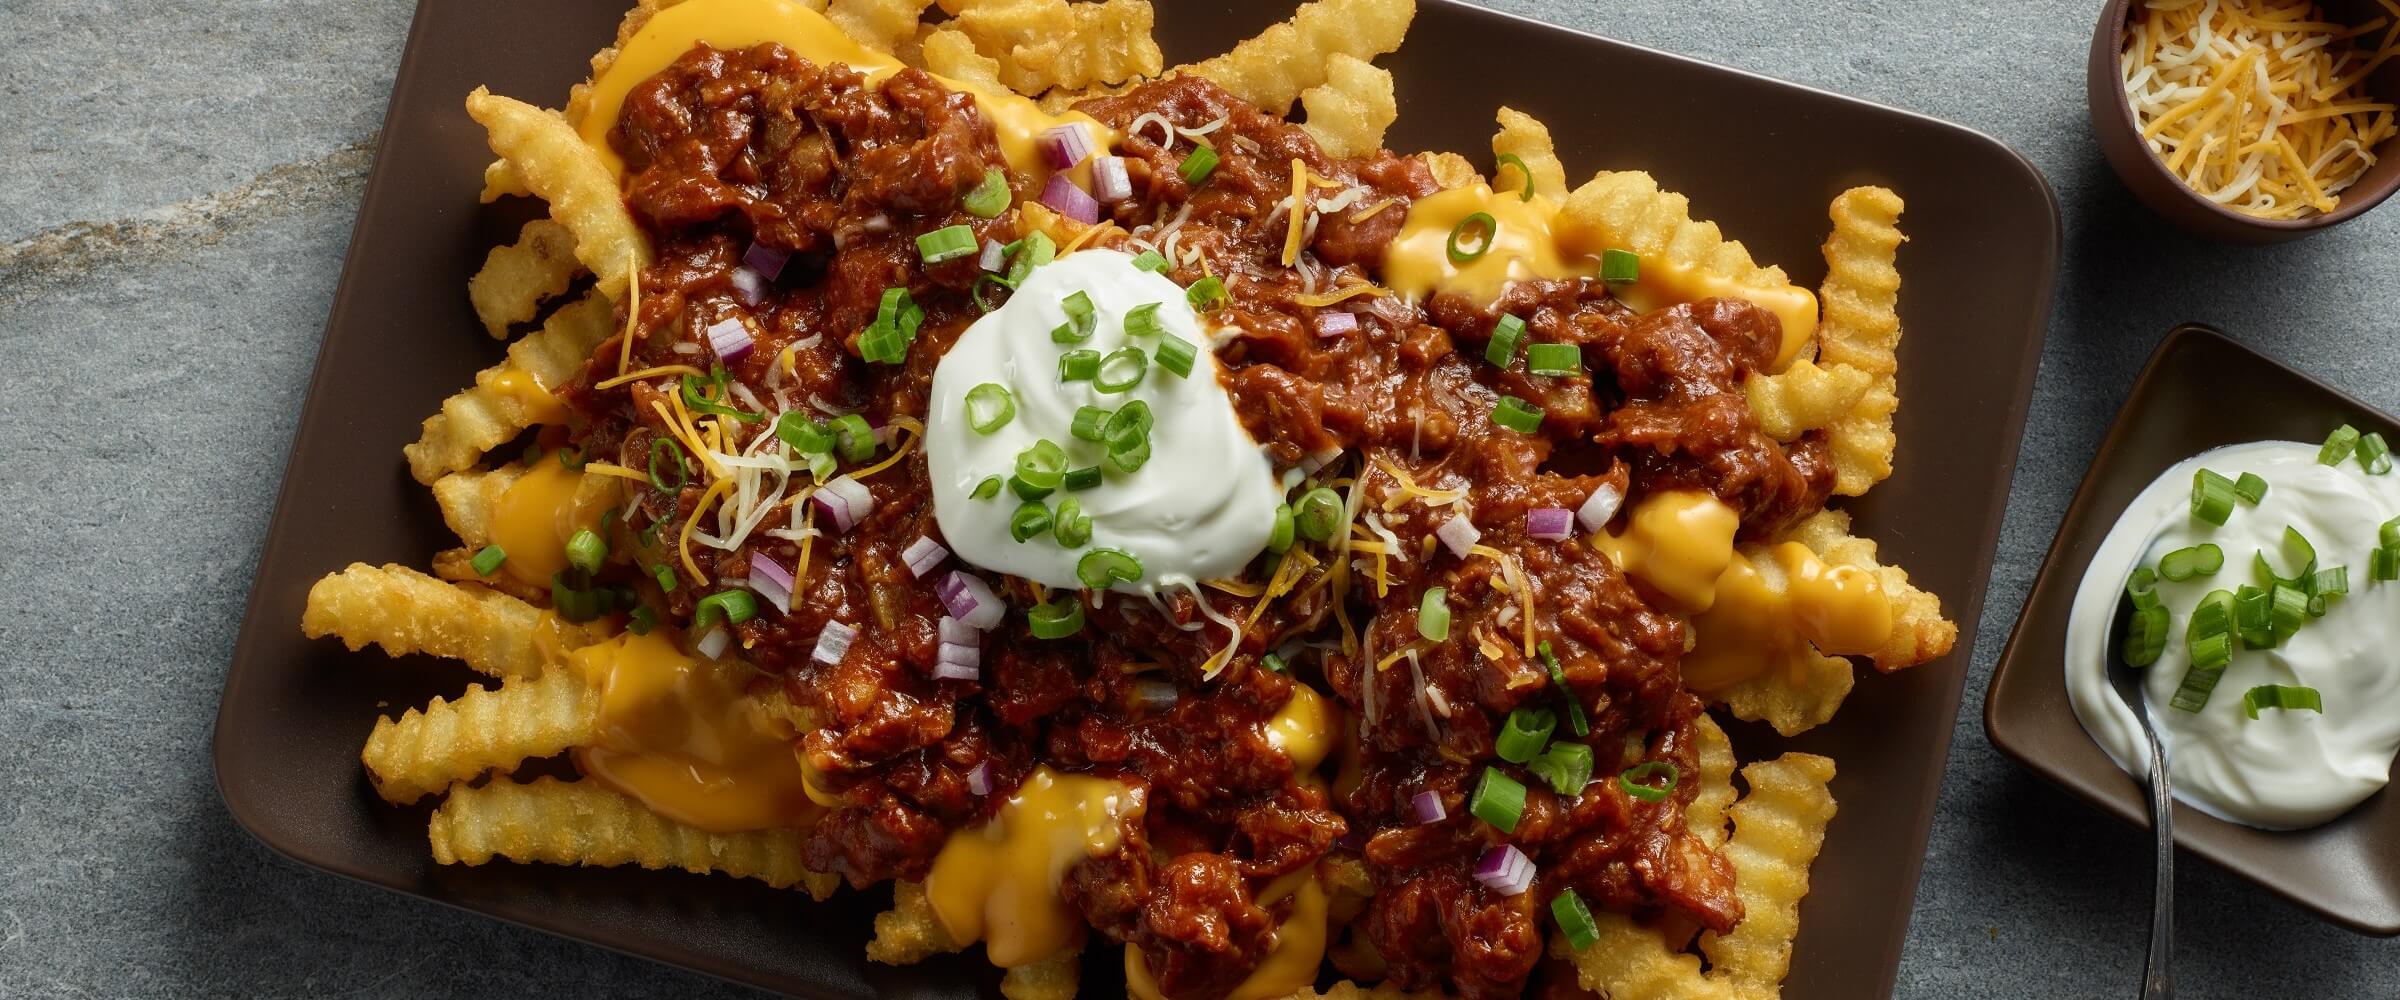 BBQ pulled pork loaded fries on plate plate topped with sour cream and green onions